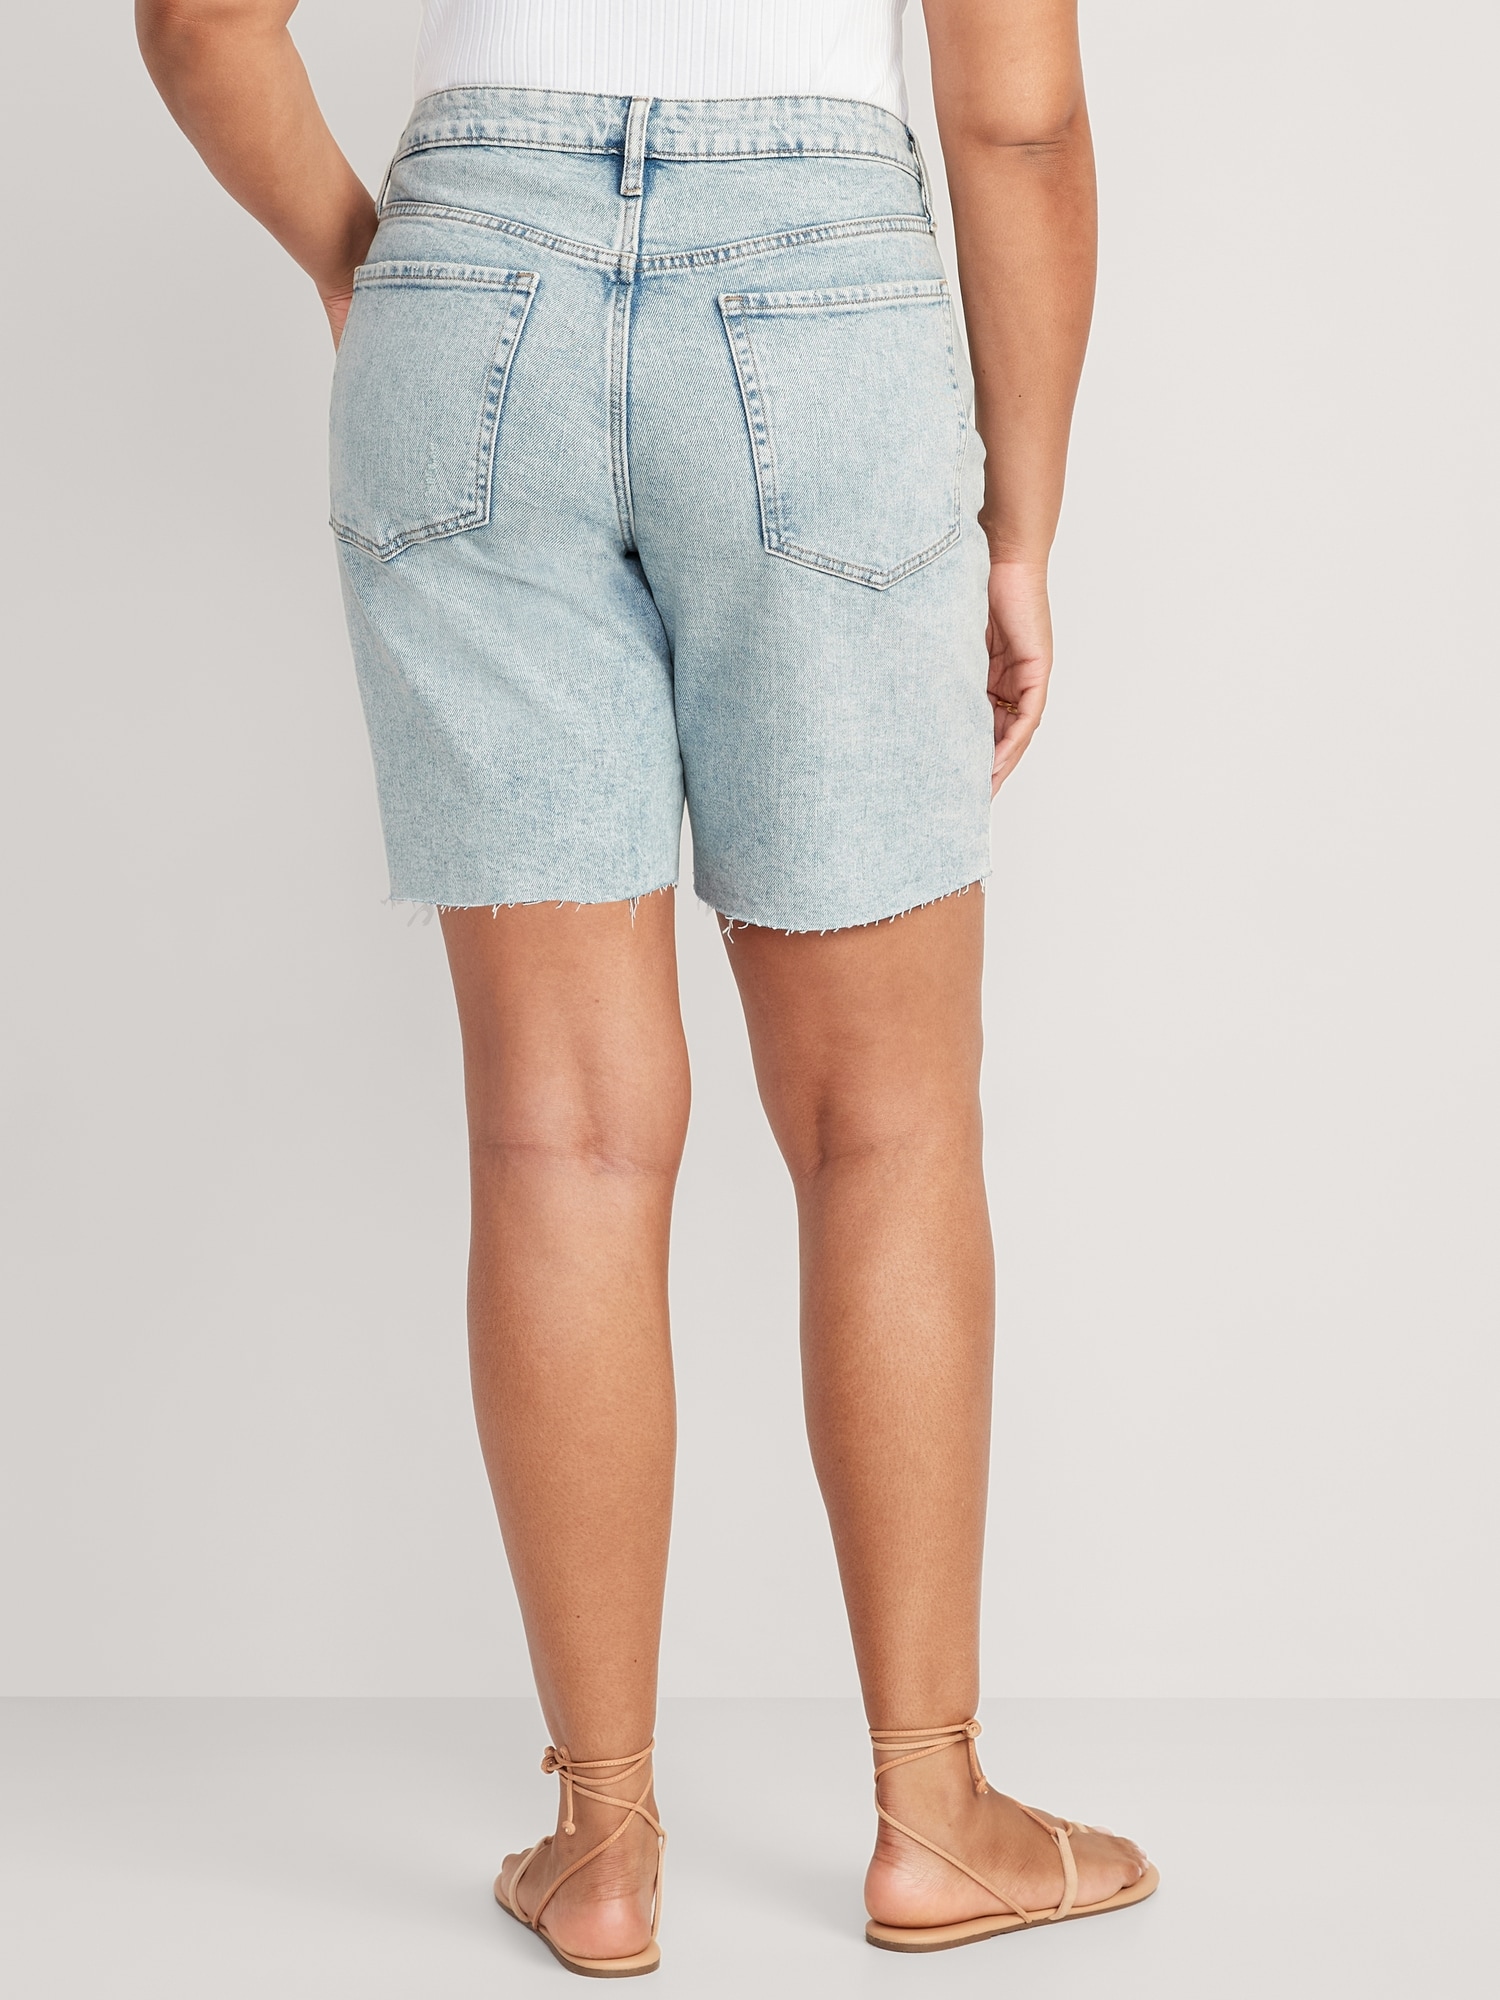 High-Waisted OG Loose Button-Fly Jean Shorts for Women -- 9-inch inseam